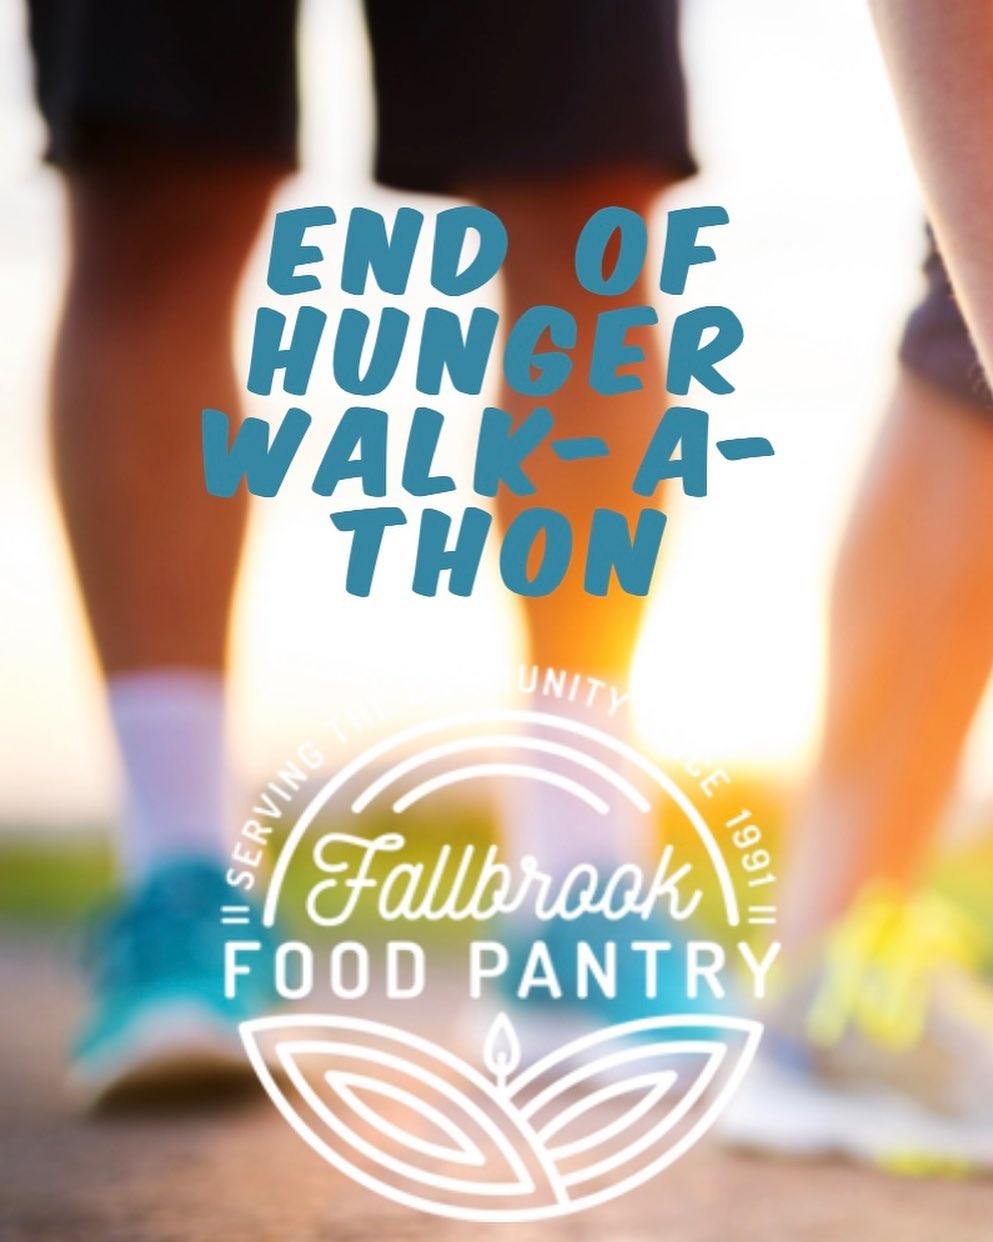 Tomorrow, June 3! Starts & ends at Trupianos on Main. Check in 8AM walk starts at 9AM. The @fallbrookmainavefarmersmarket will be open during this time also! A great morning of fellowship and community. #fallbrookfoodpantry #walkathon #fallbrookvineyardchurch